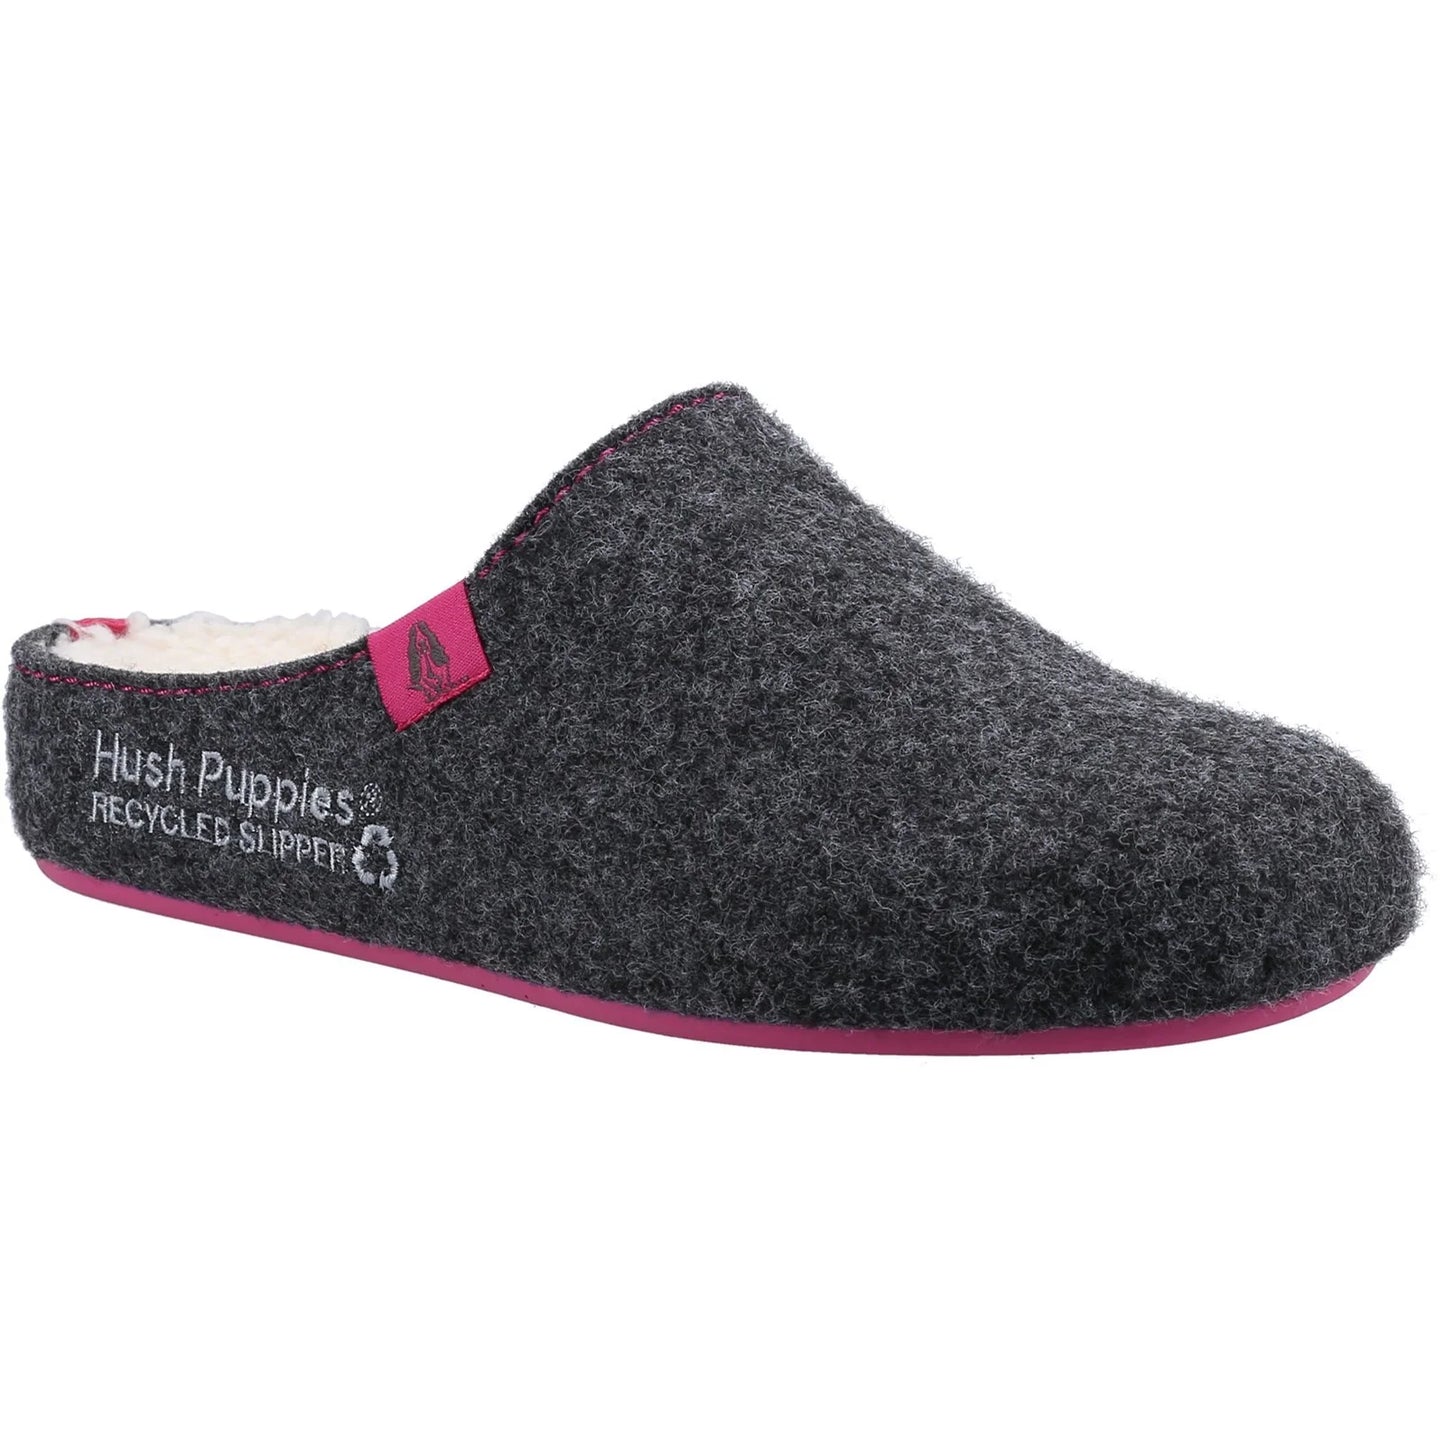 Hush Puppies Women's Recycled The Good Slipper Charcoal